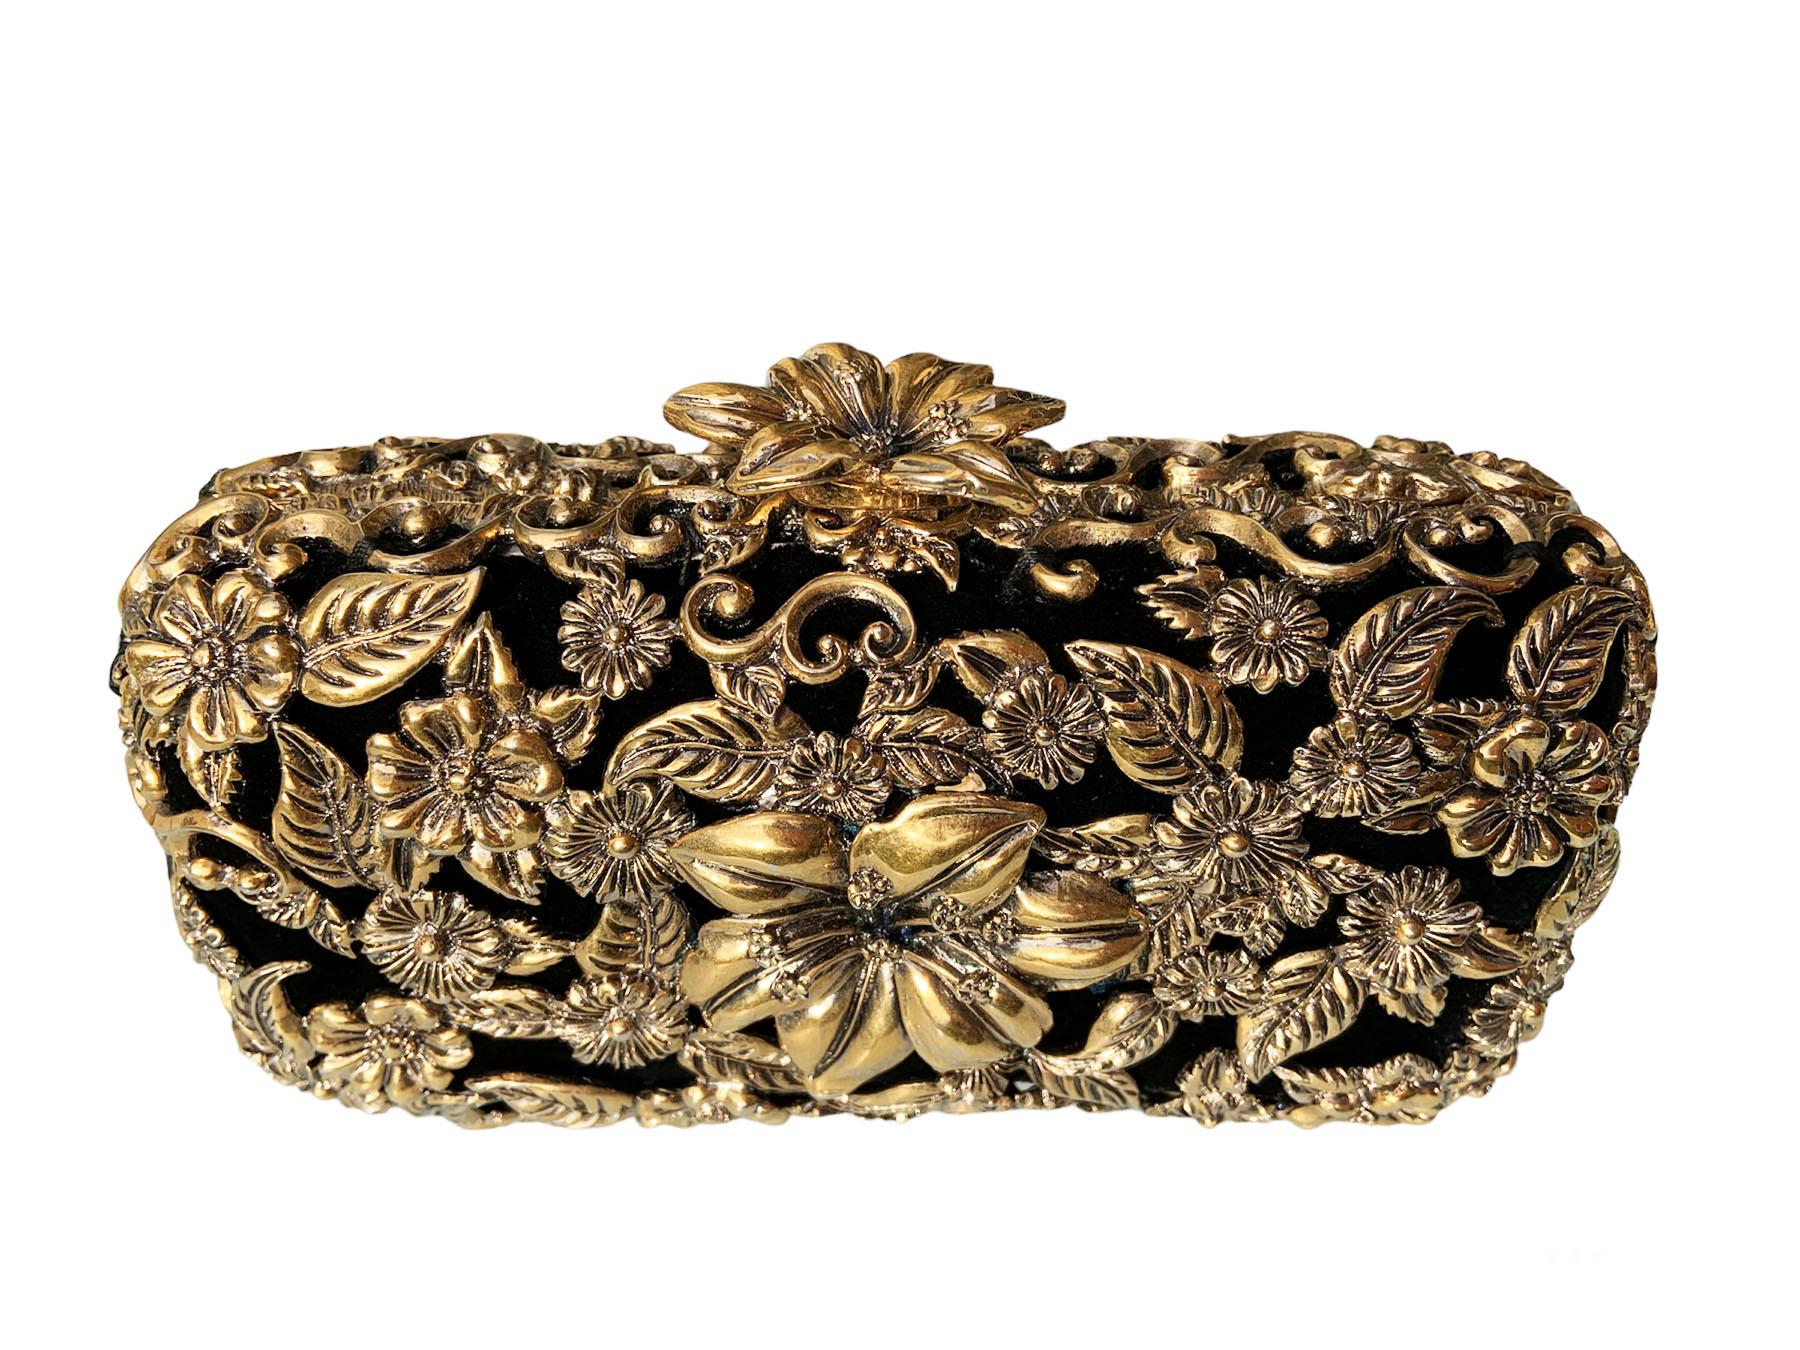 Vintage Yves Saint Laurent Rive Gauche Gold Tone Metal Clutch
Limited Edition  
Amazing Hand-Crafted Gold Tone Metal Frame with Flowers and Scrolls over the Black Velour, Adorned from Both Sides. 
Lift lock closure with 3-D Flower.  Black Velour